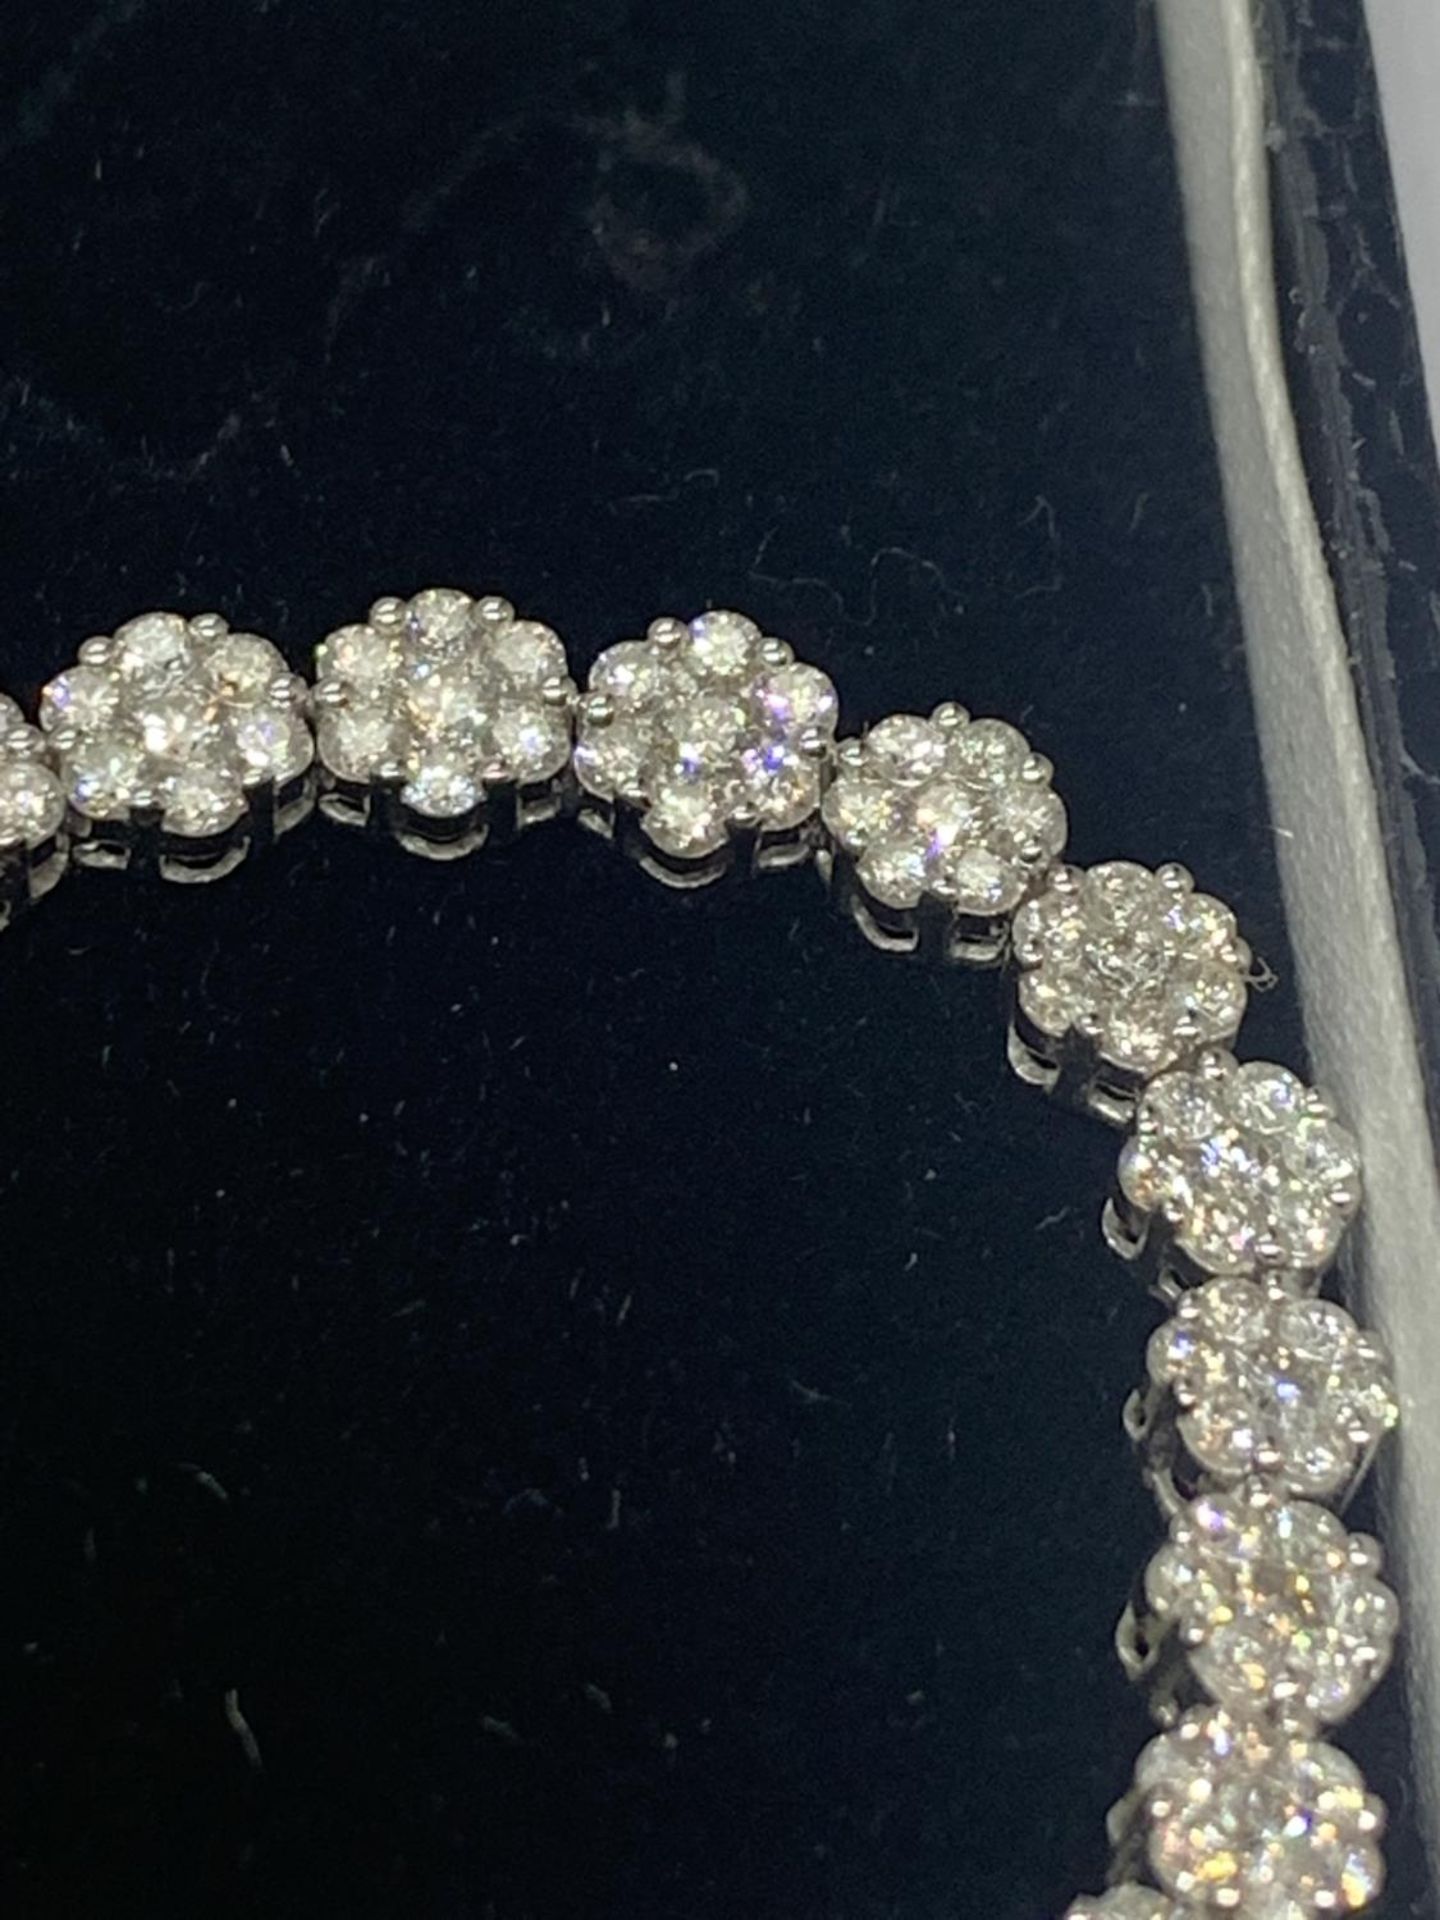 AN 18 CARAT WHITE GOLD NECKLACE WITH 10 CARAT OF DIAMONDS LENGTH APPROXIMATELY 43CM - Image 7 of 10